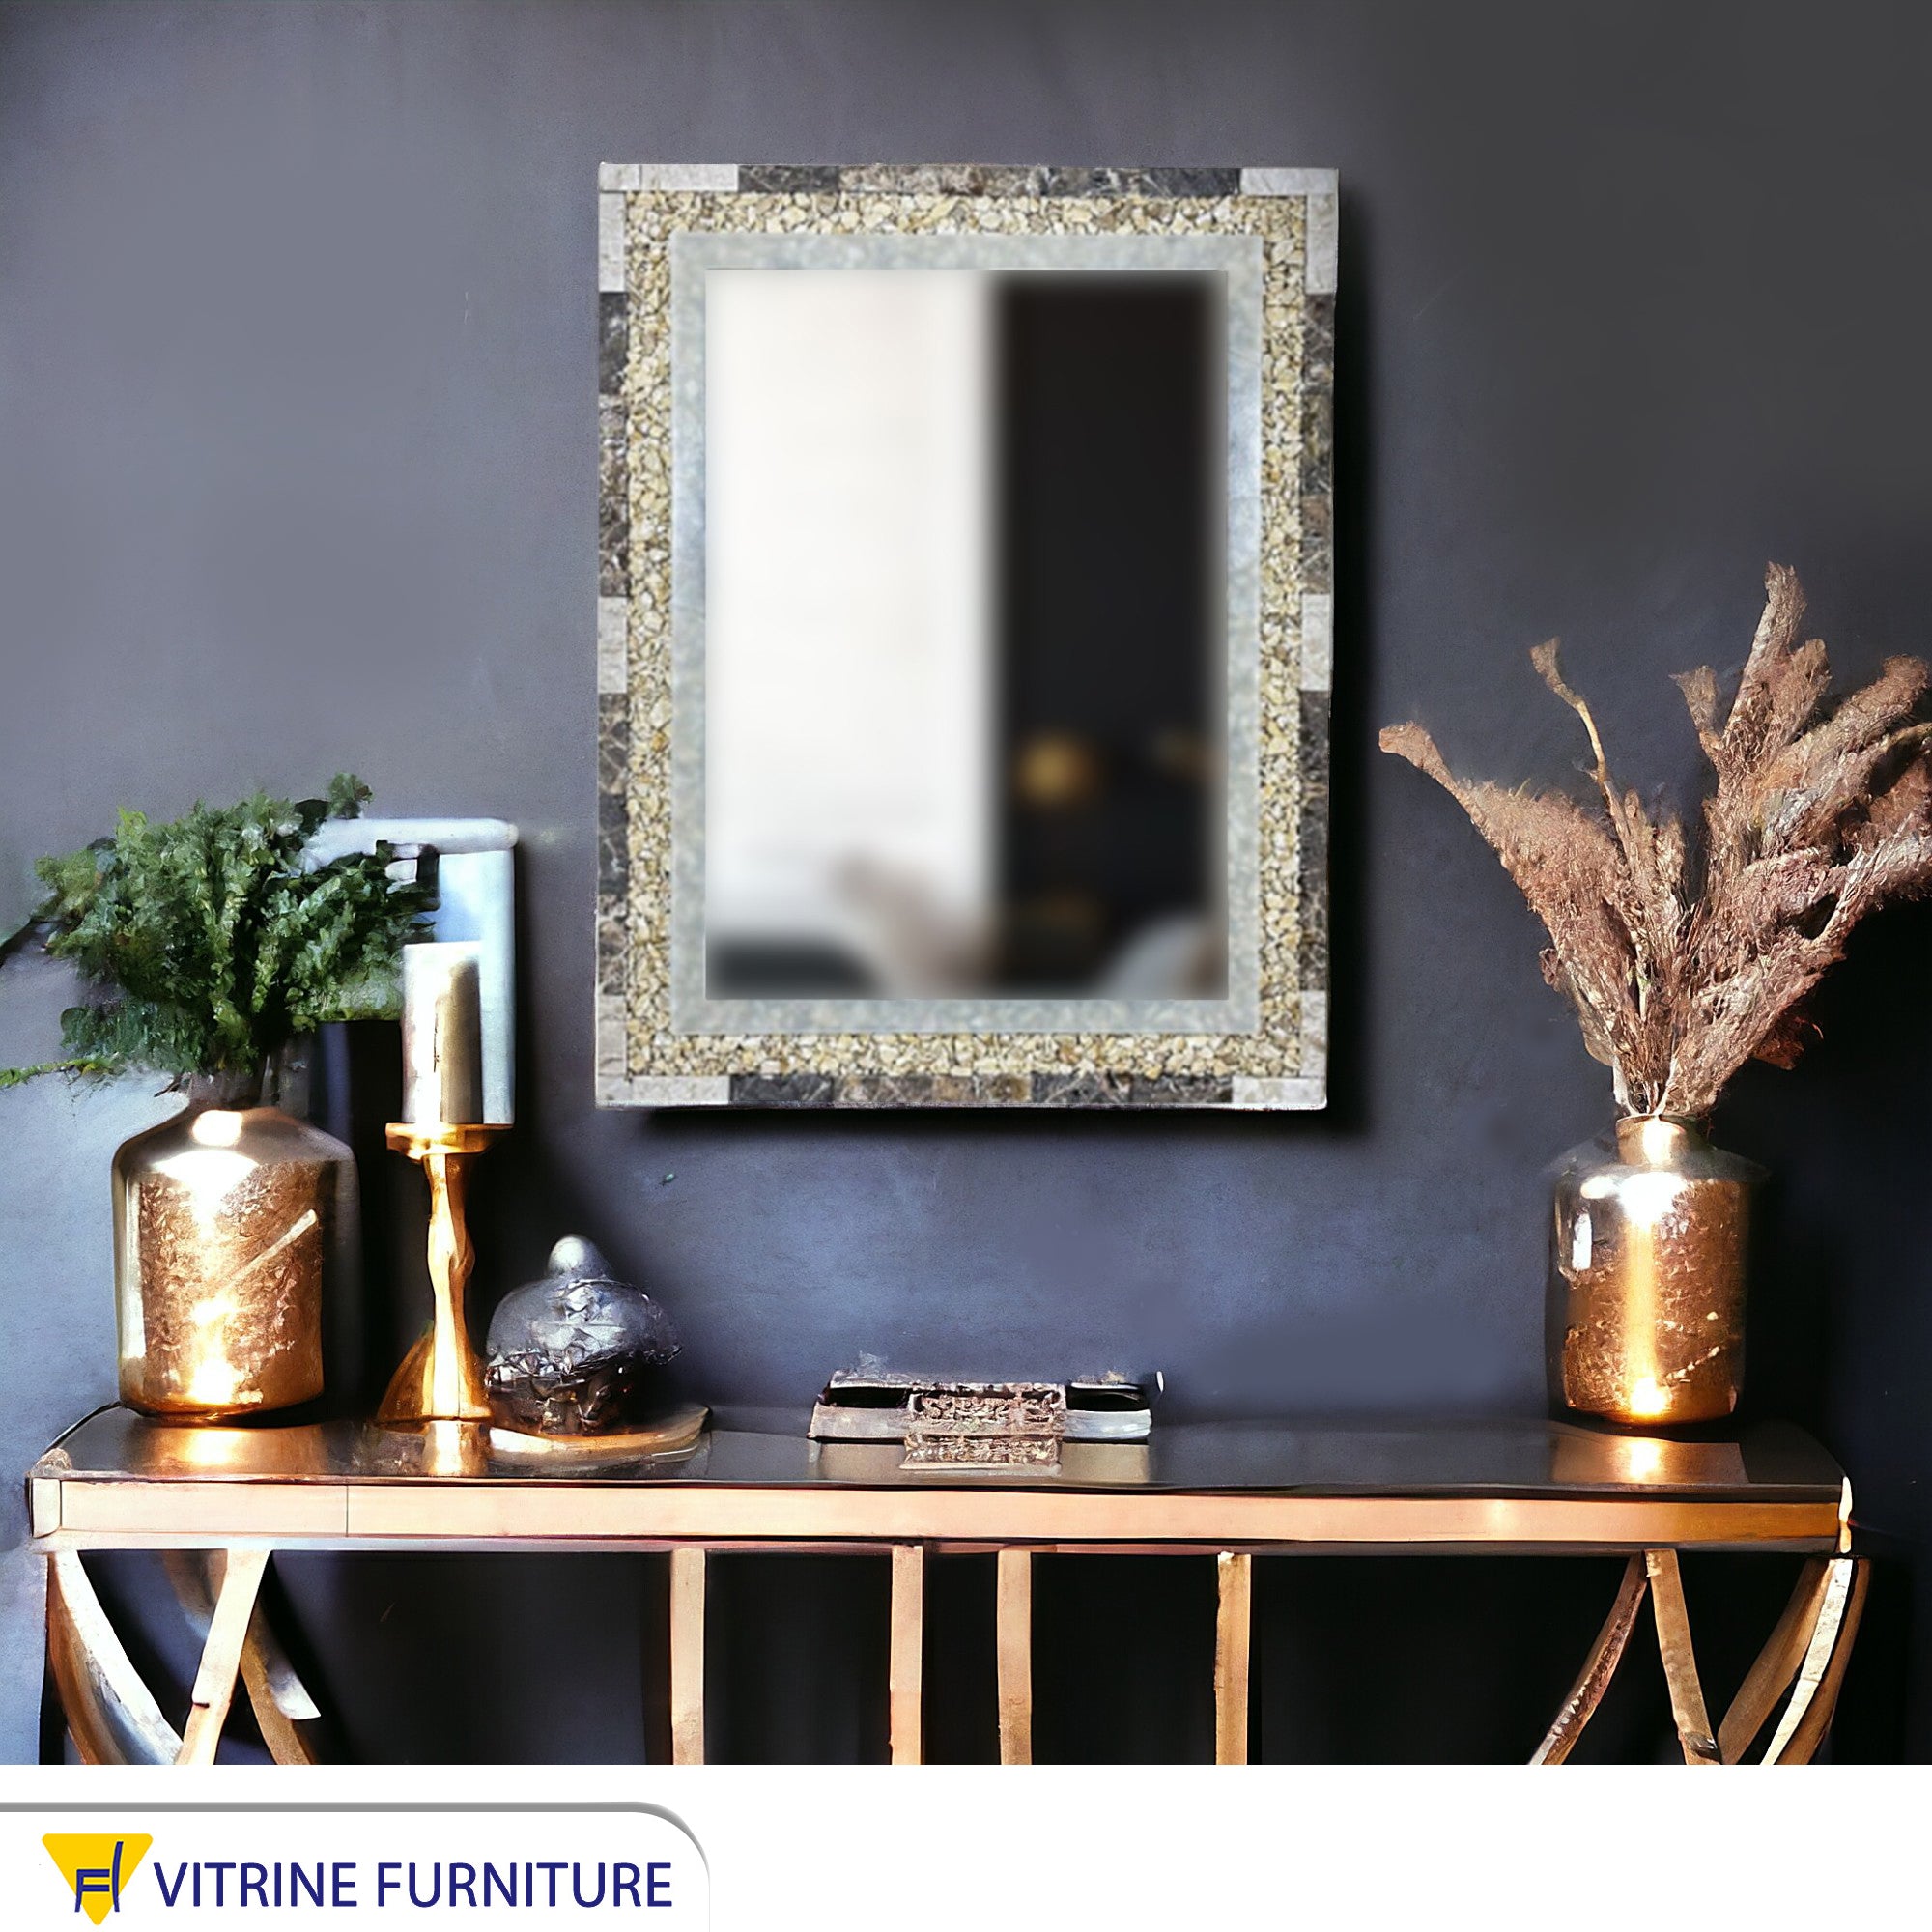 Rectangular mirror with a marble and stone frame